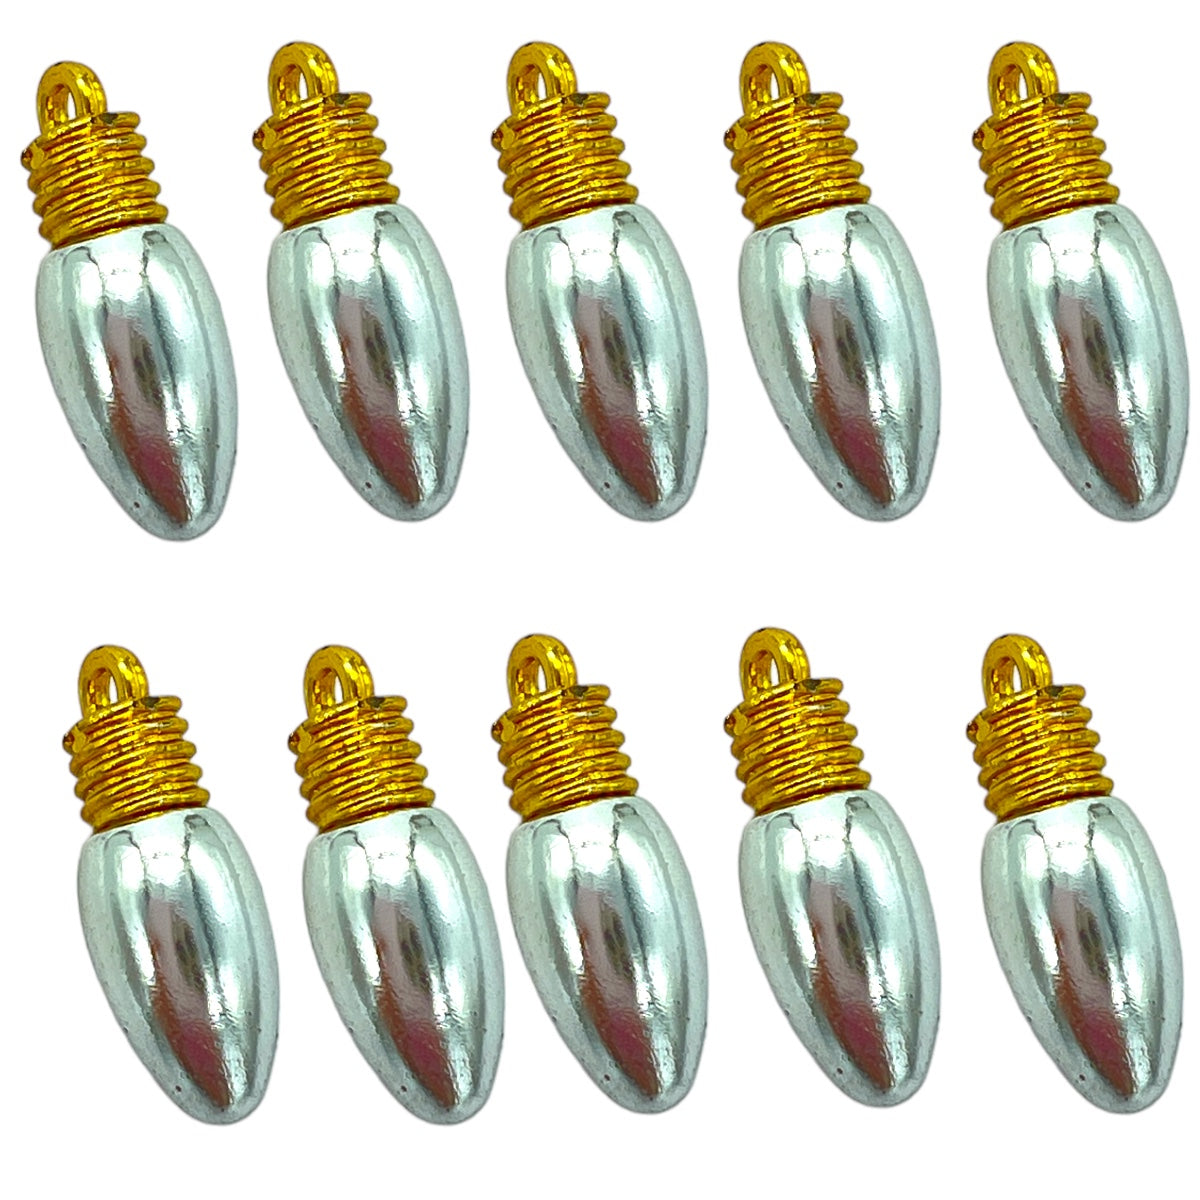 1 inch Christmas Light Plastic Charms - 10 Pack Blue